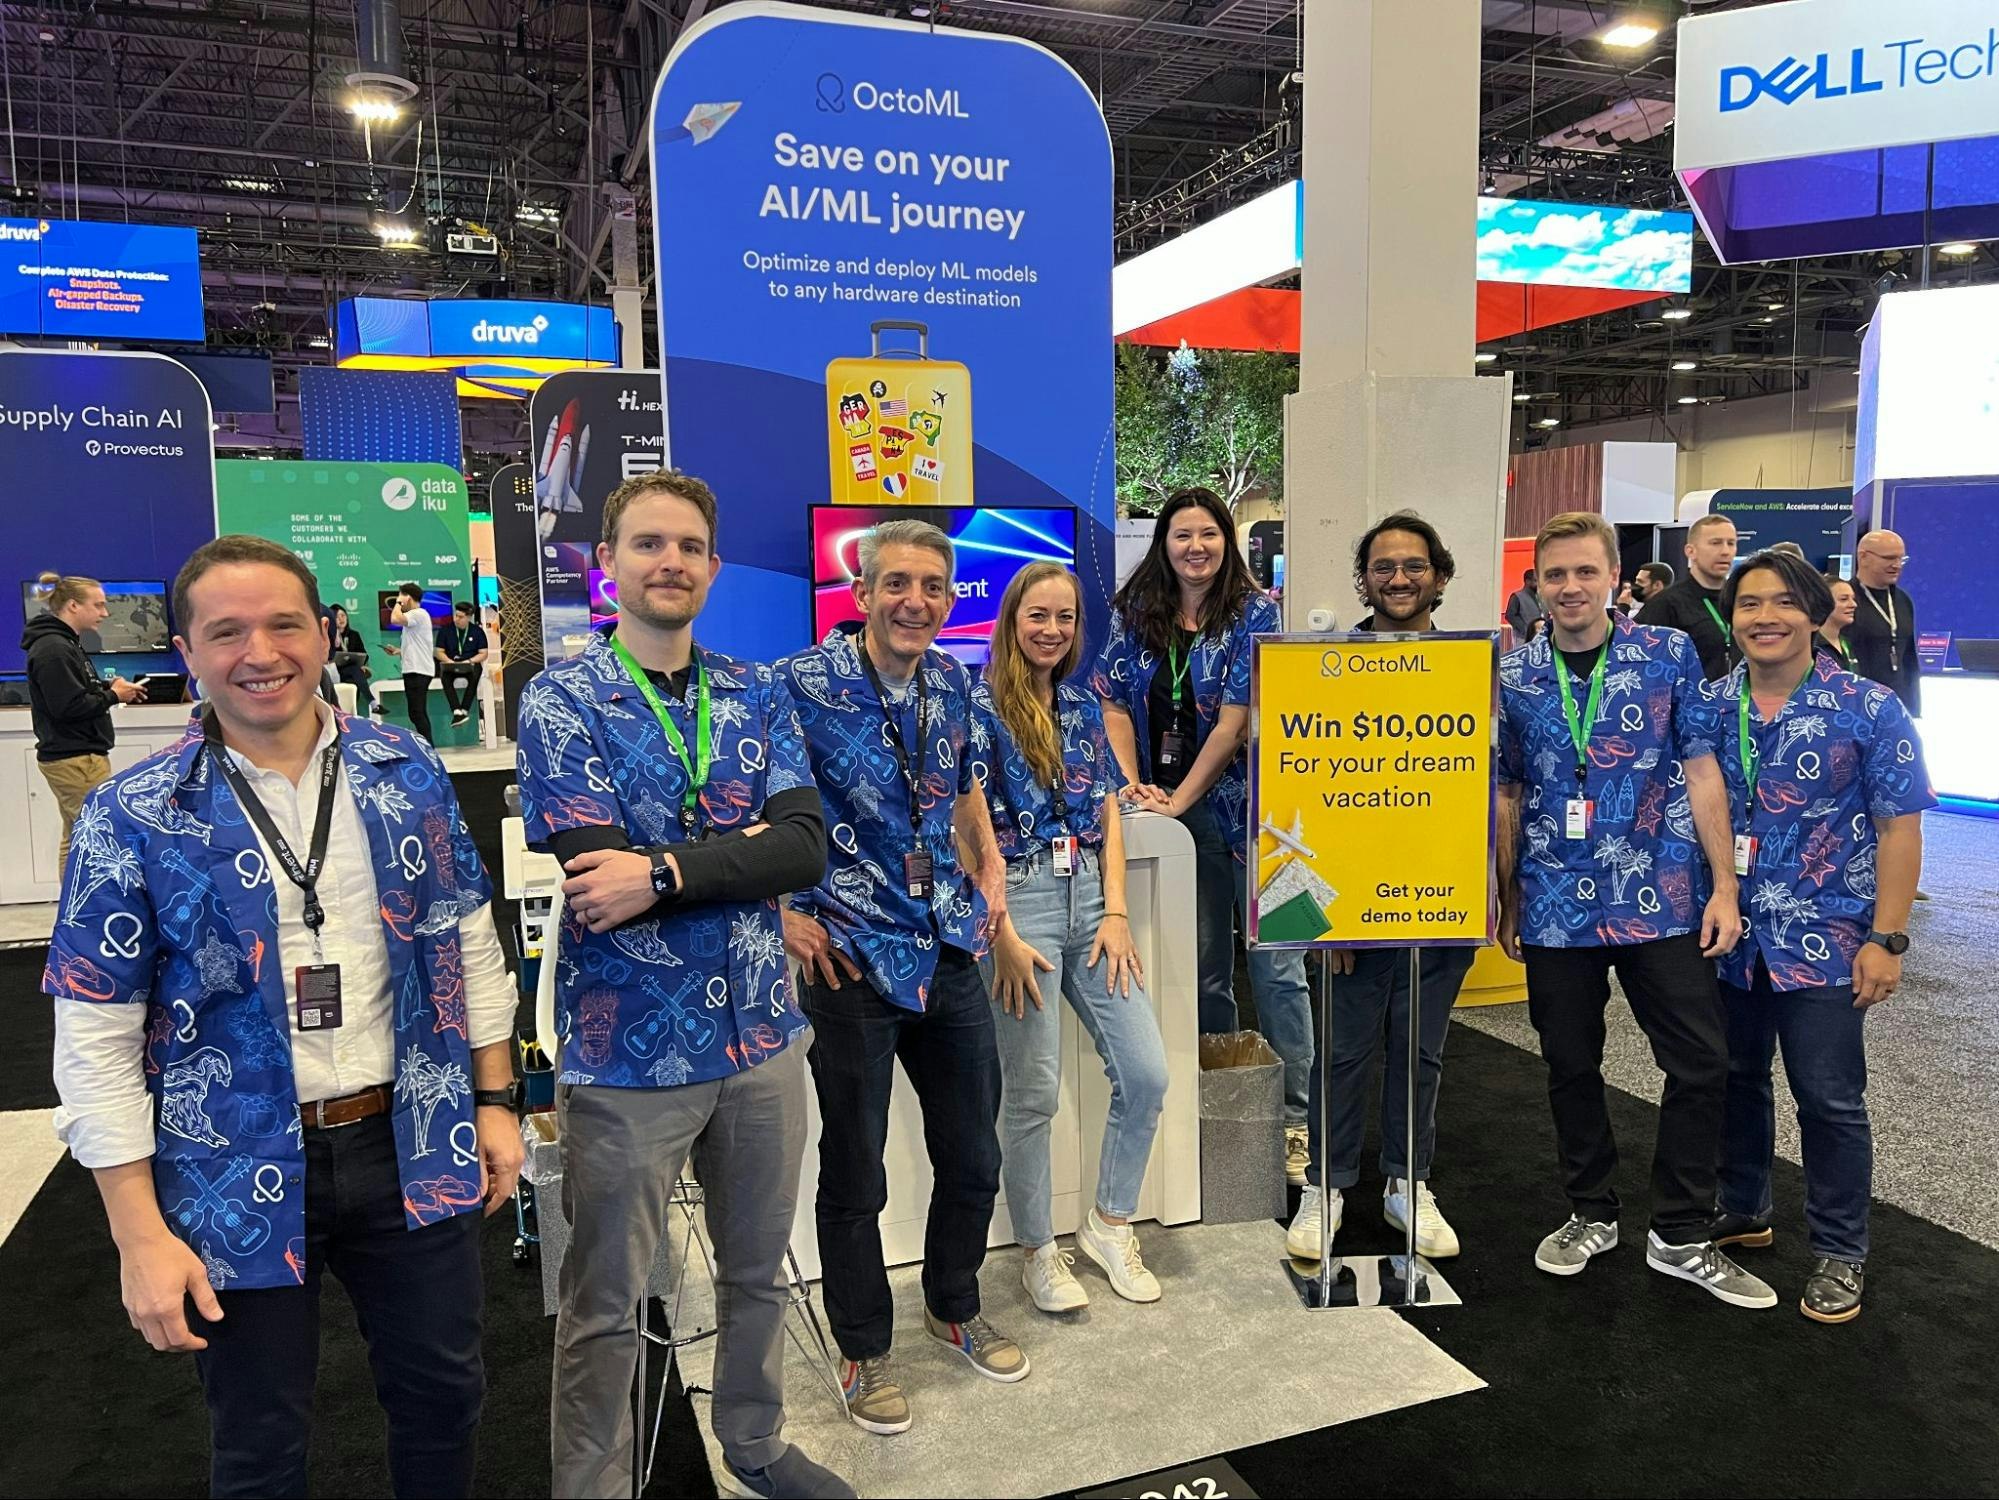 OctoML employees at the OctoML booth at AWS re:Invent 2022 showcasing the giveaway prize || '